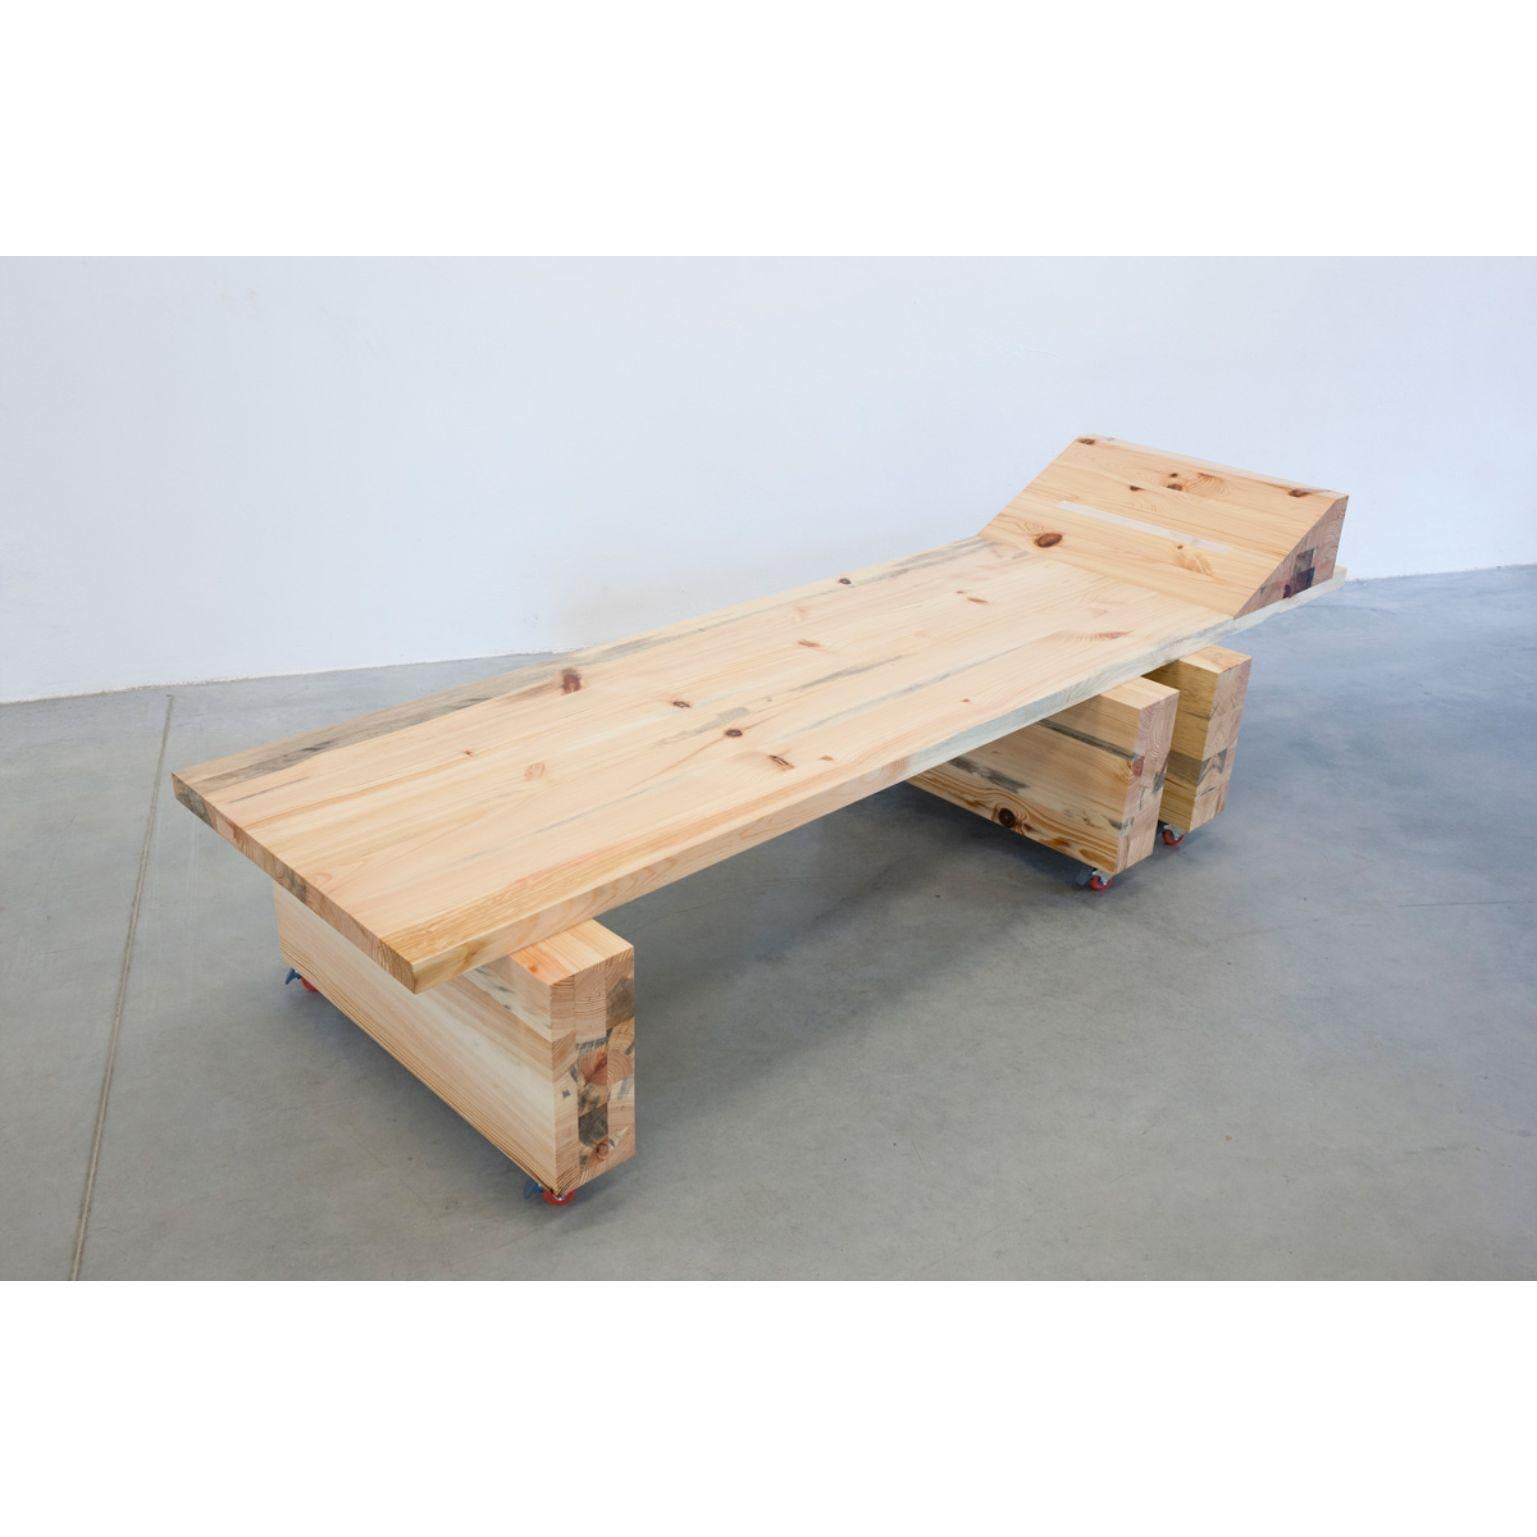 Allpine daybed by Radu Abraham
Materials: Pine wood
Dimensions: 230 x 70 x 35 cm

The result of a really nice process, this daybed is made entirely out of pine wood in a specific aesthetic language, with straight edge geometry and blocky